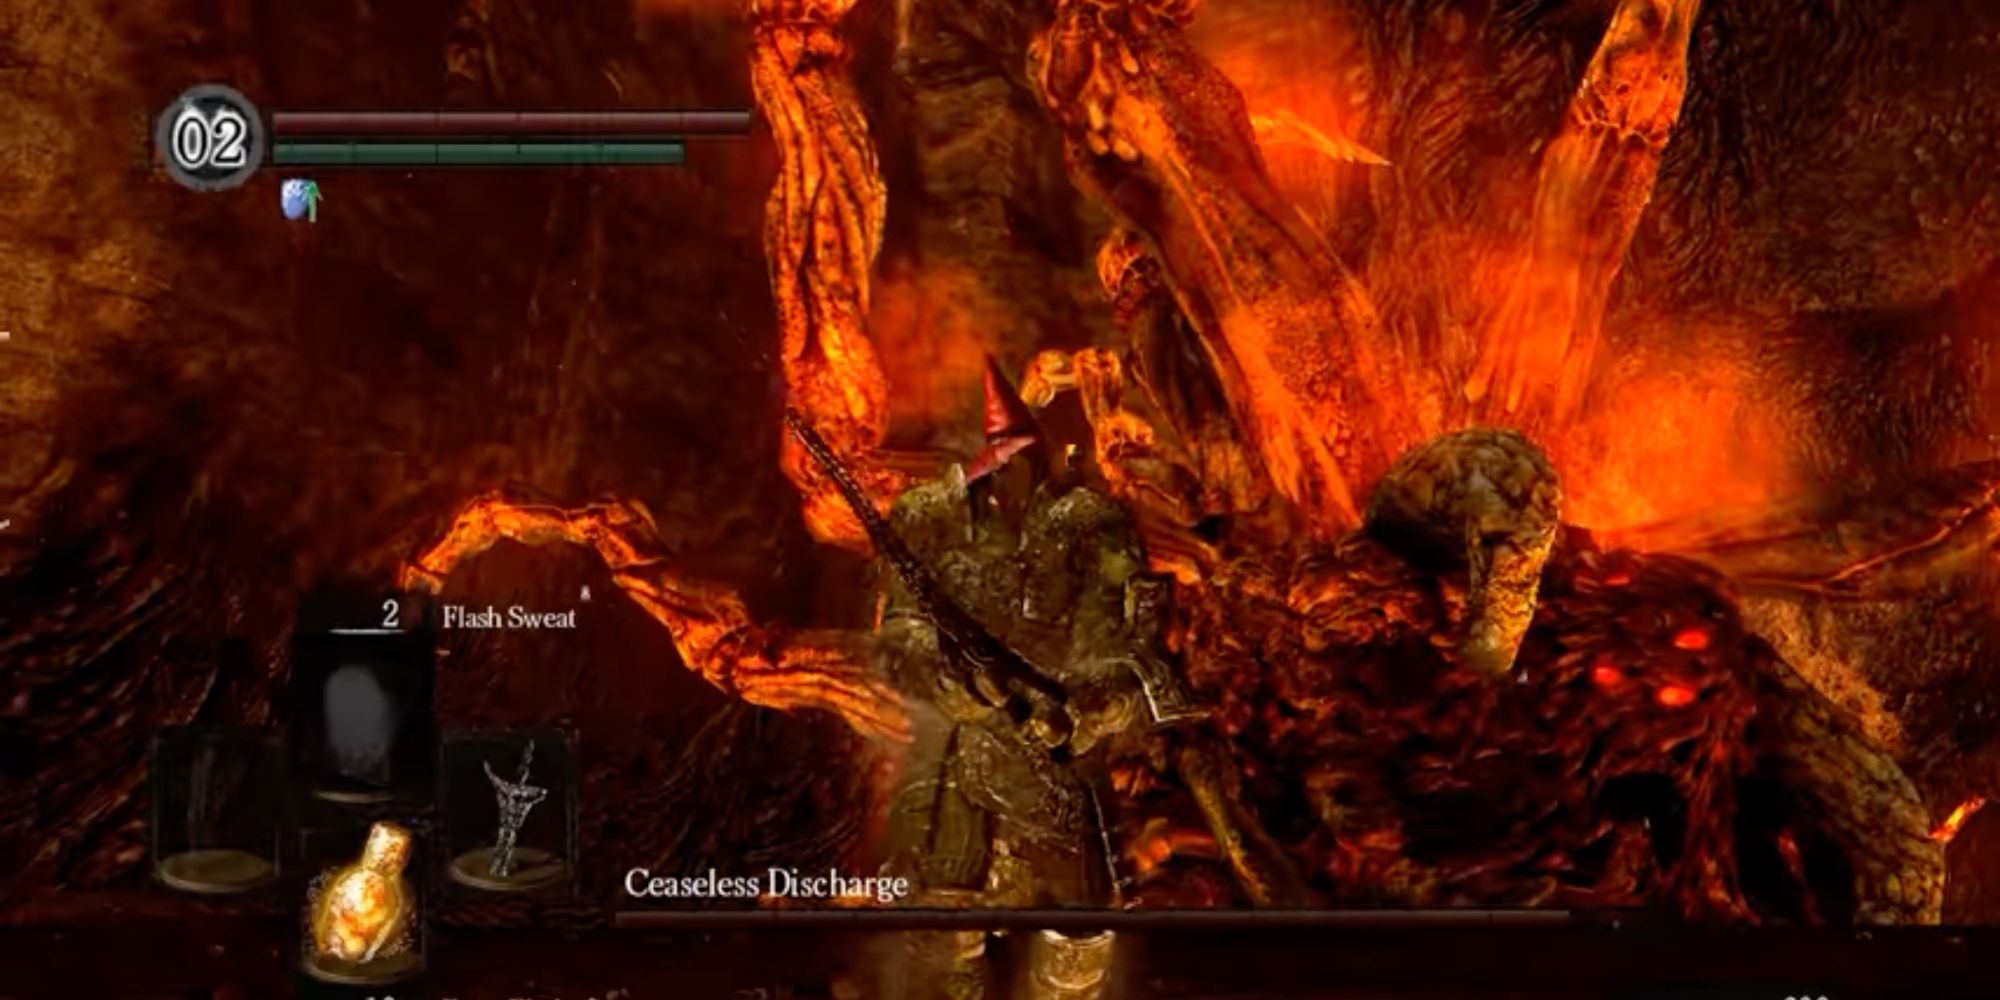 The Ceaseless Discharge boss towers over the player in Dark Souls